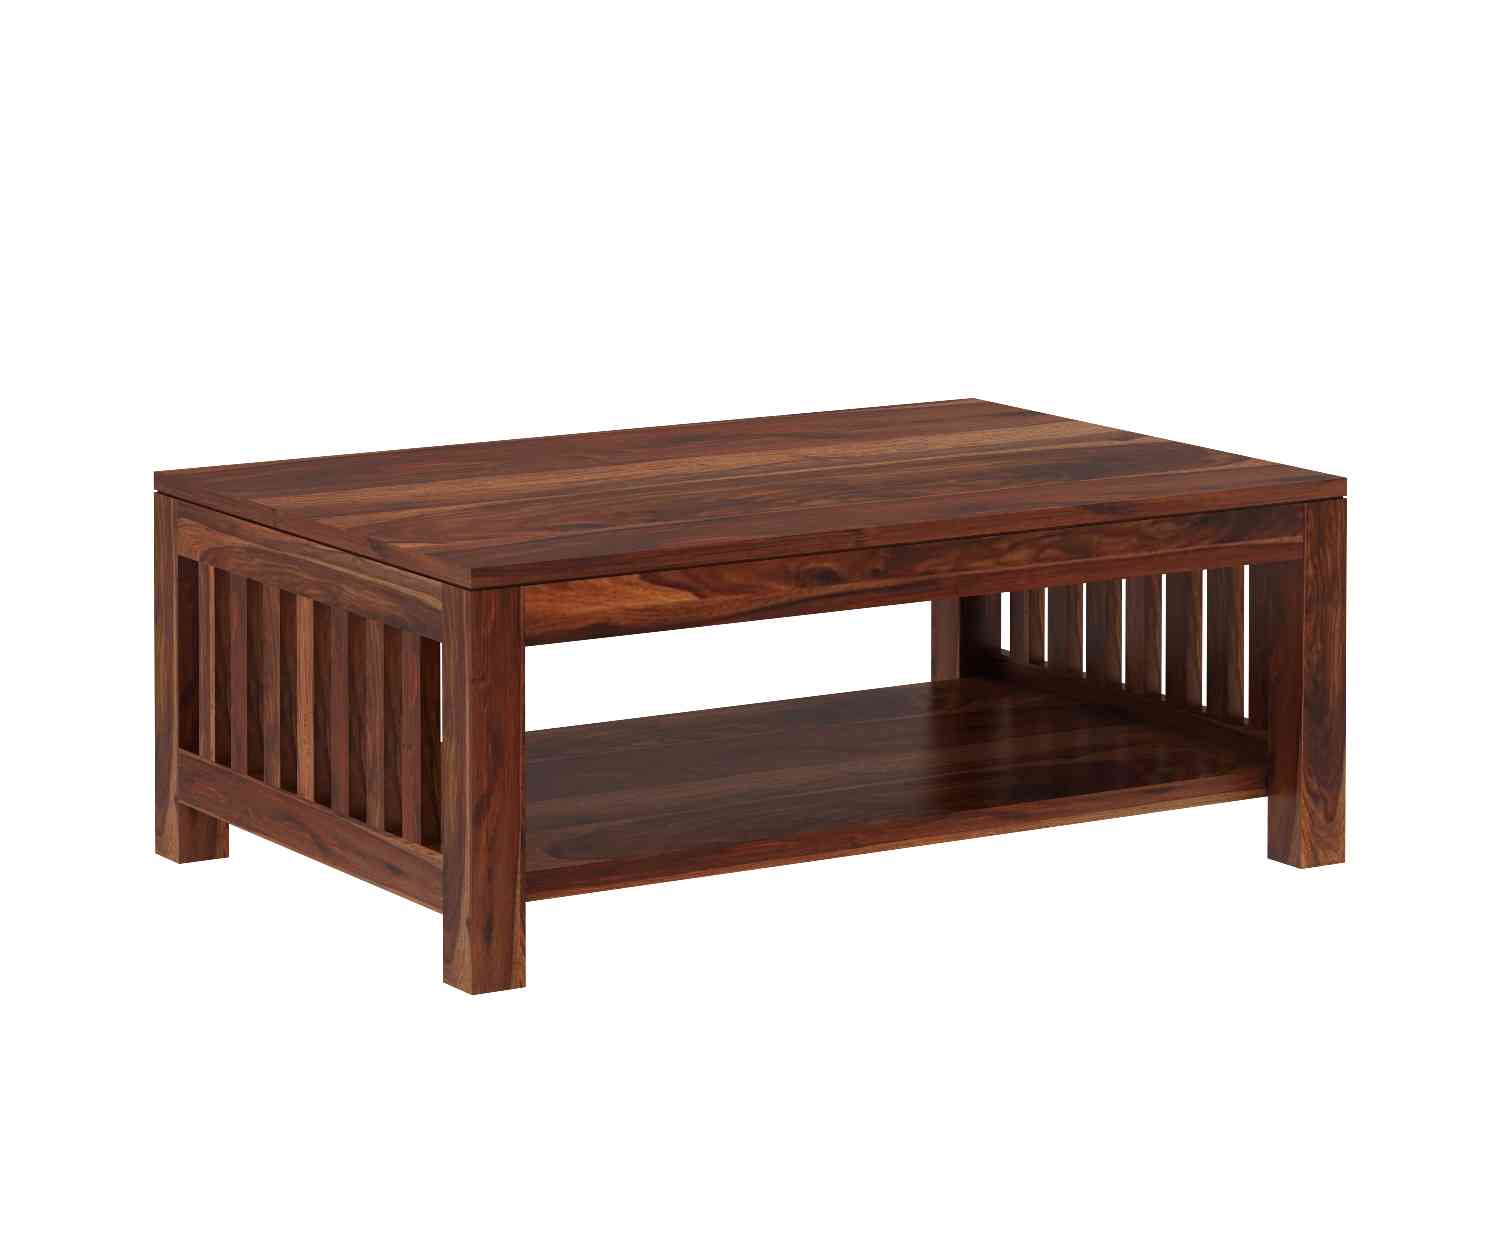 Essen Solid Sheesham Wood Coffee Table (Natural Finish)